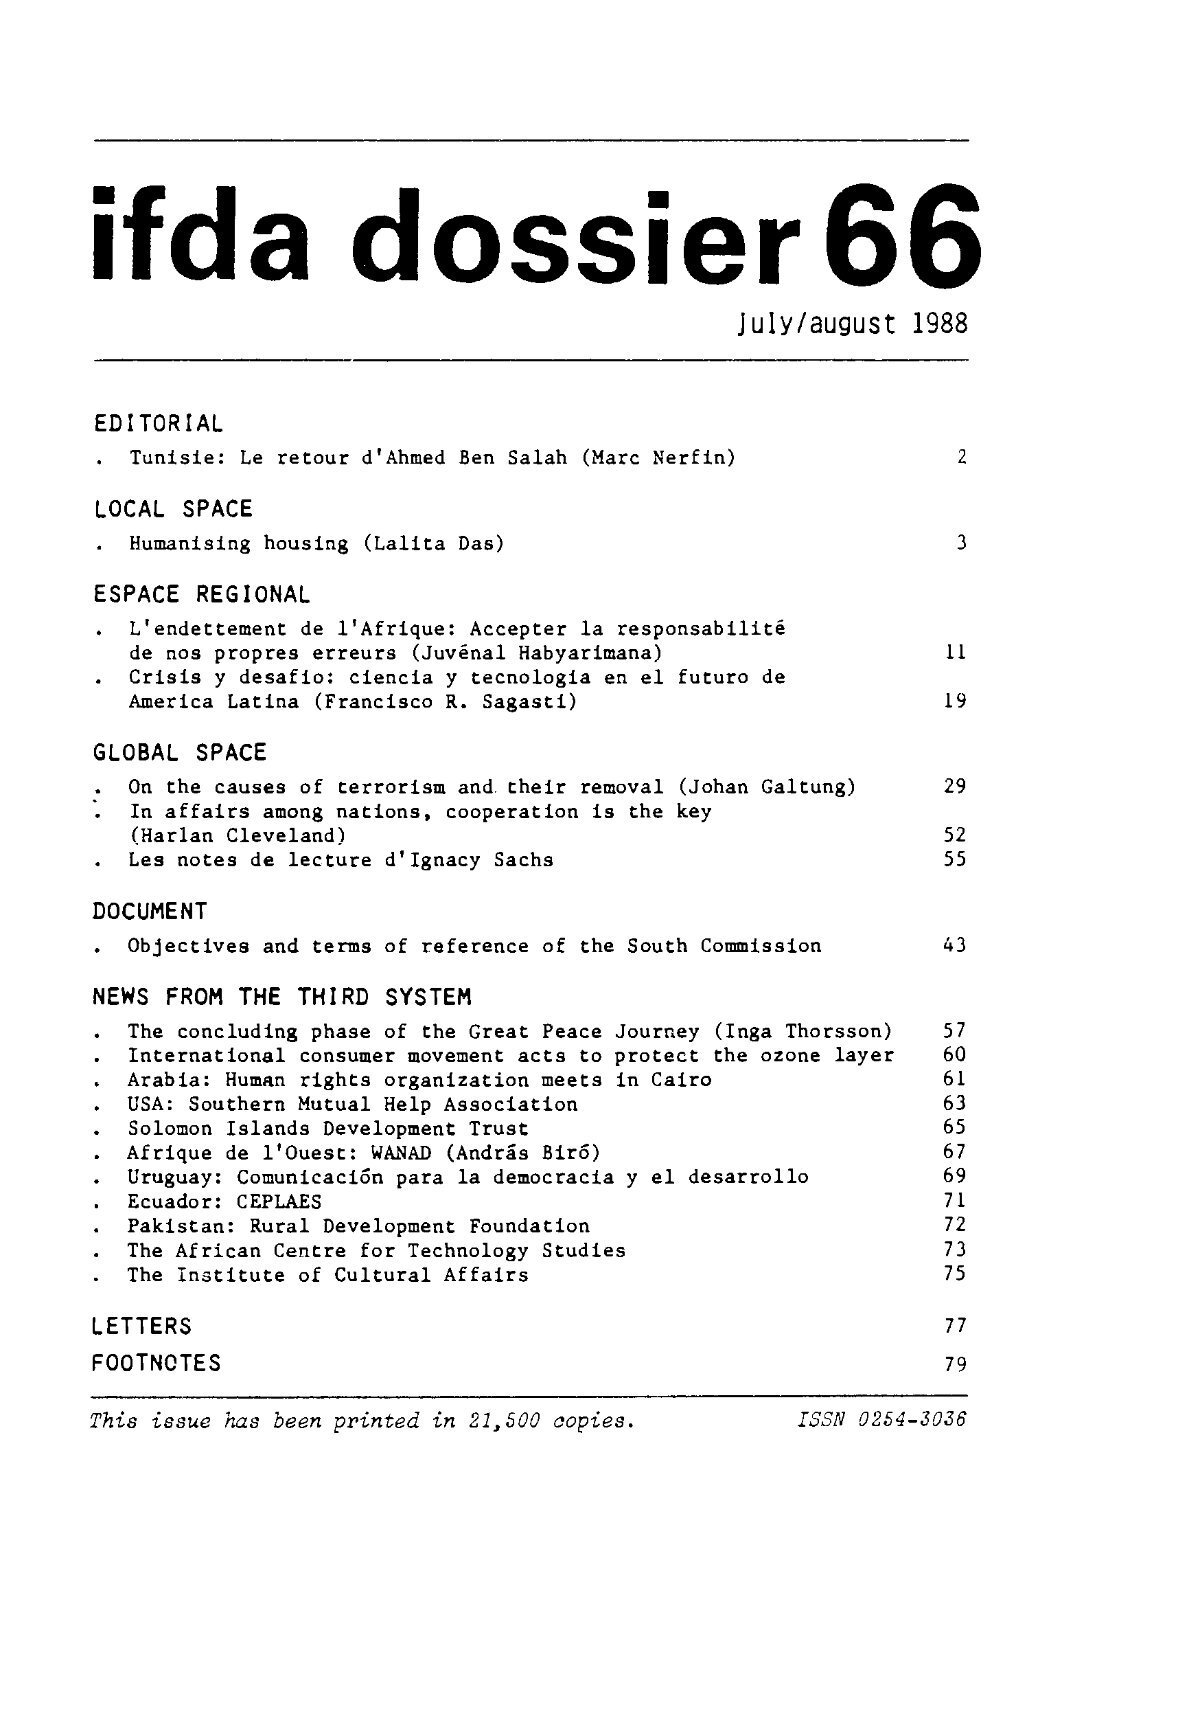 Ifda dossier 66, July/August 1988